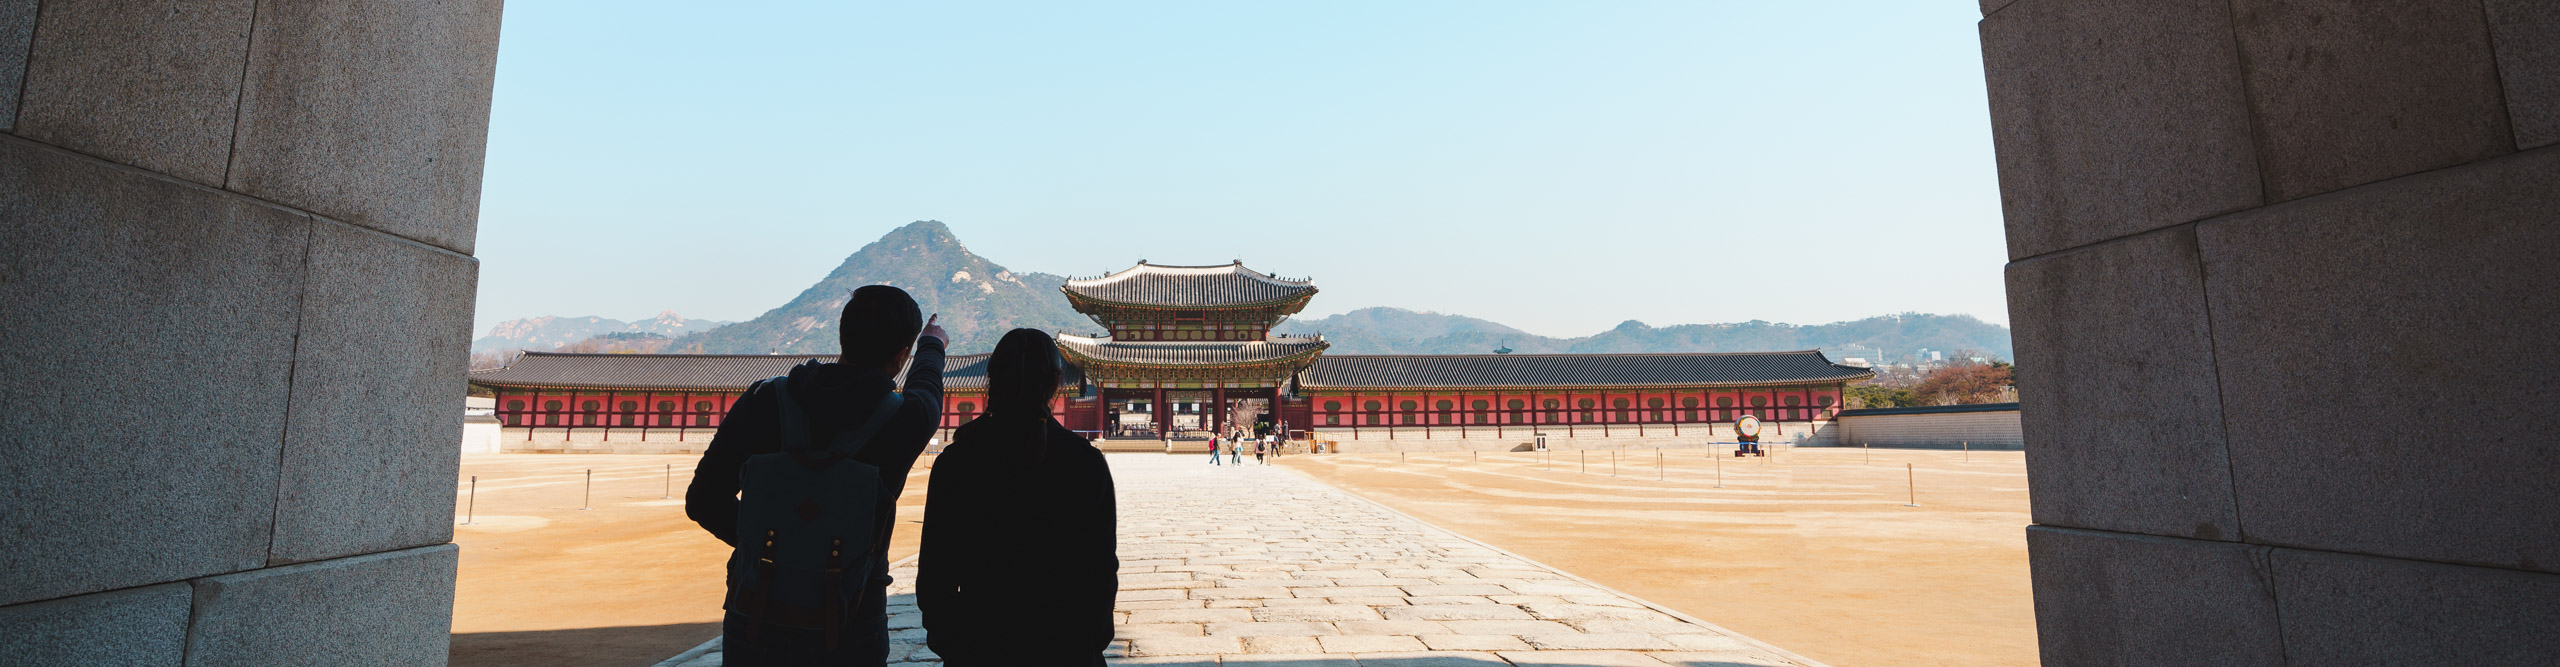 Gyeongbokgung Palace, its is one of the five palaces that still stand in Seoul, on a sunny day